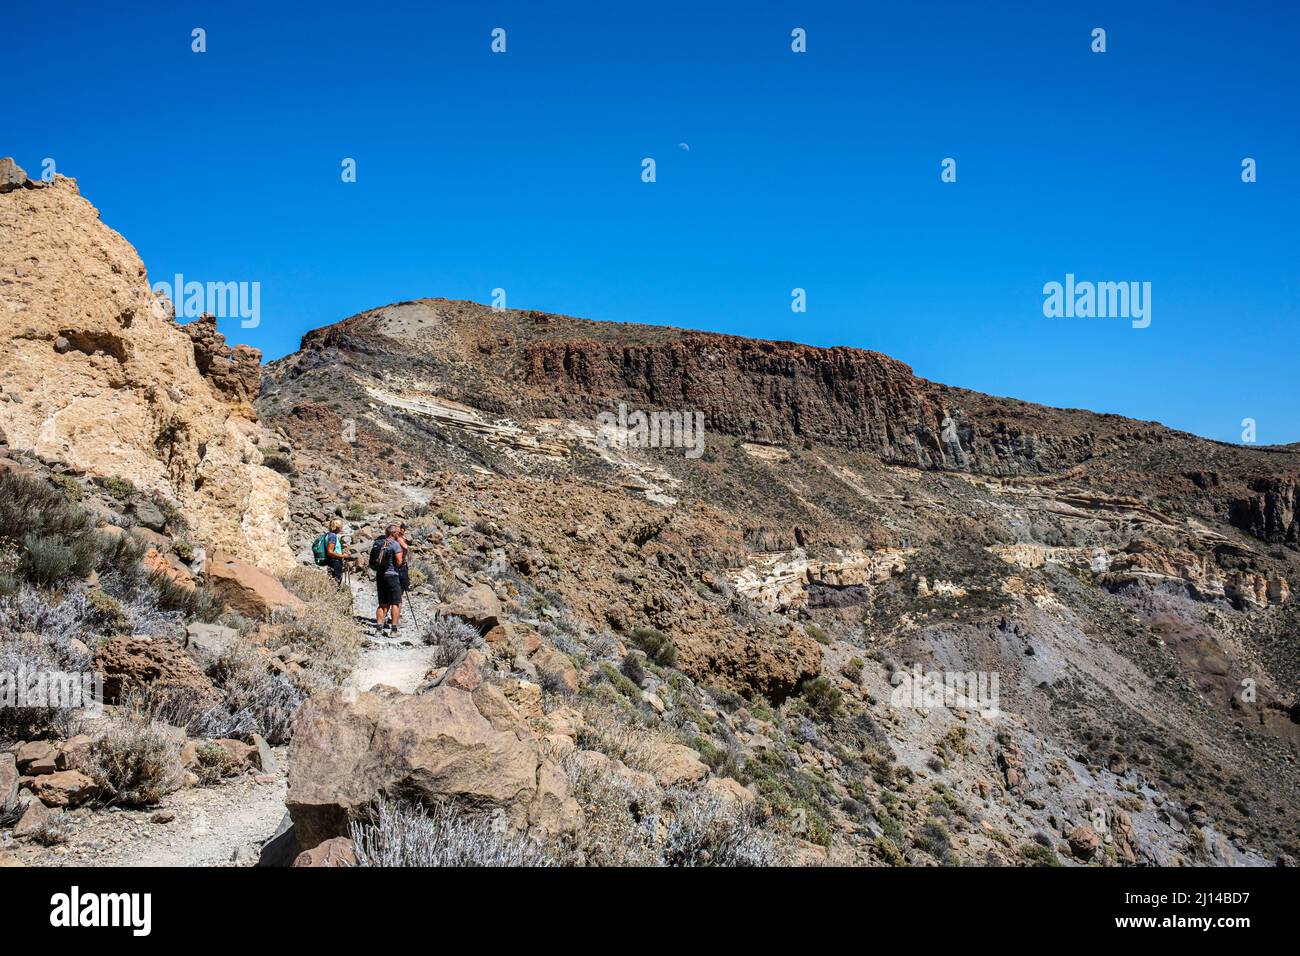 Lunar landscape, volcanic rock rormations on the route to the Guajara mountain in the Las Canadas del Teide national park, Tenerife, Canary Islands, S Stock Photo